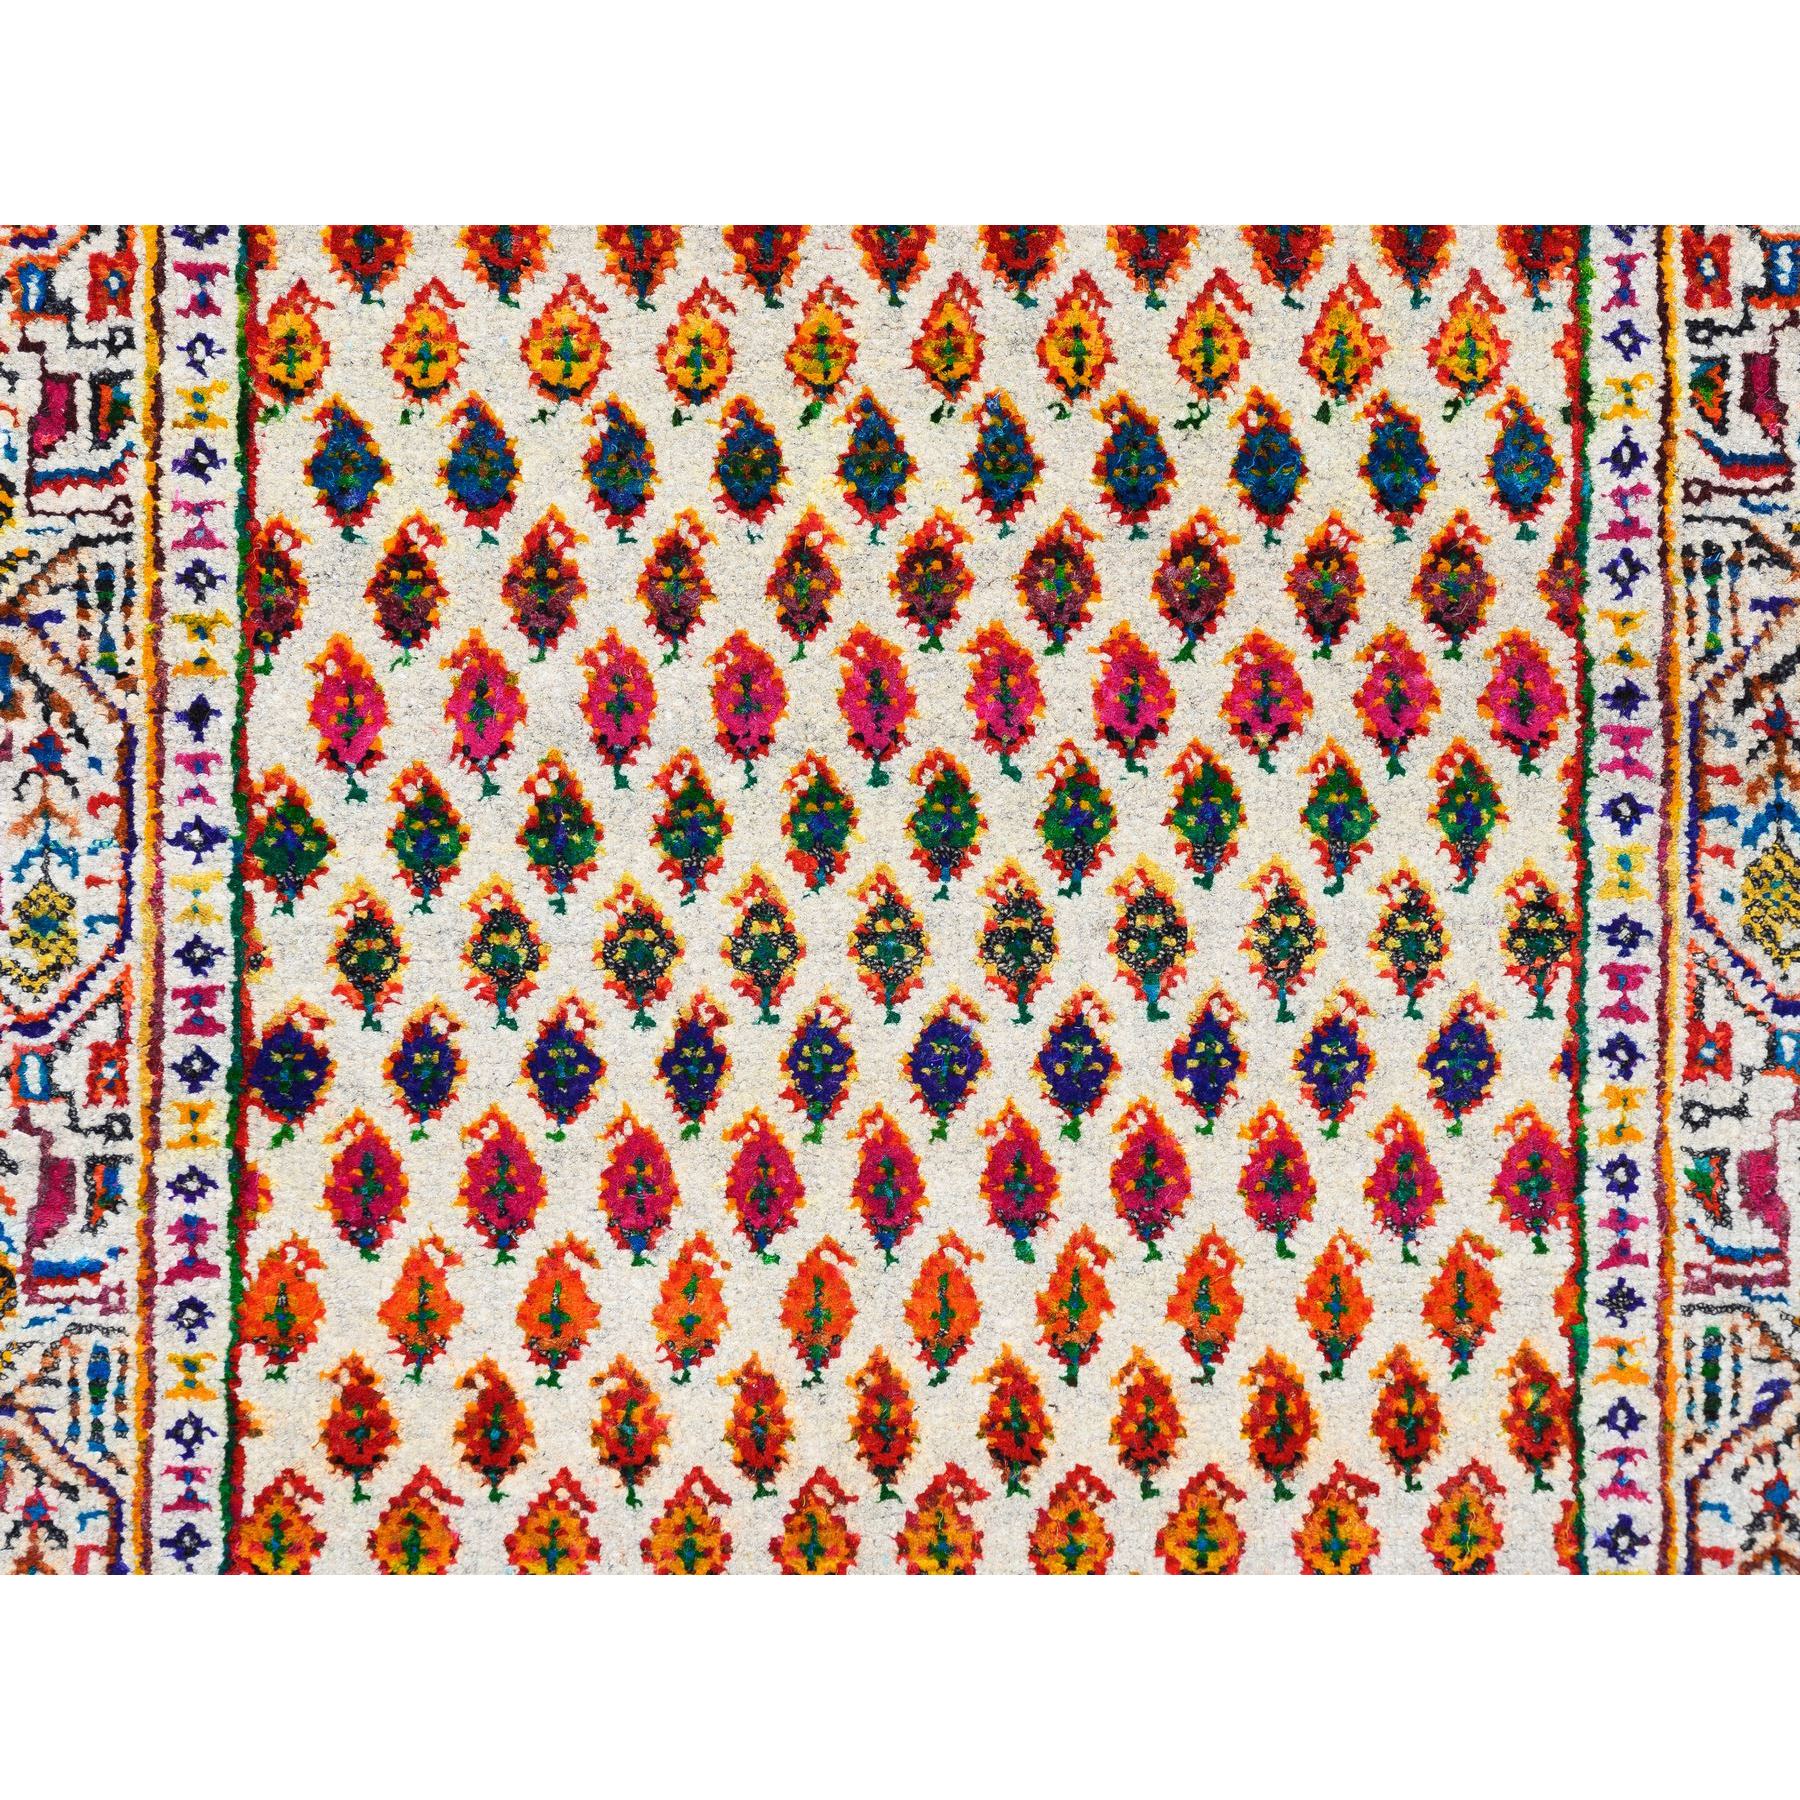 2'4"x10'2" Colorful Wool And Sari Silk Sarouk Mir Inspired With Multiple Borders Hand Woven Oriental Runner Rug 